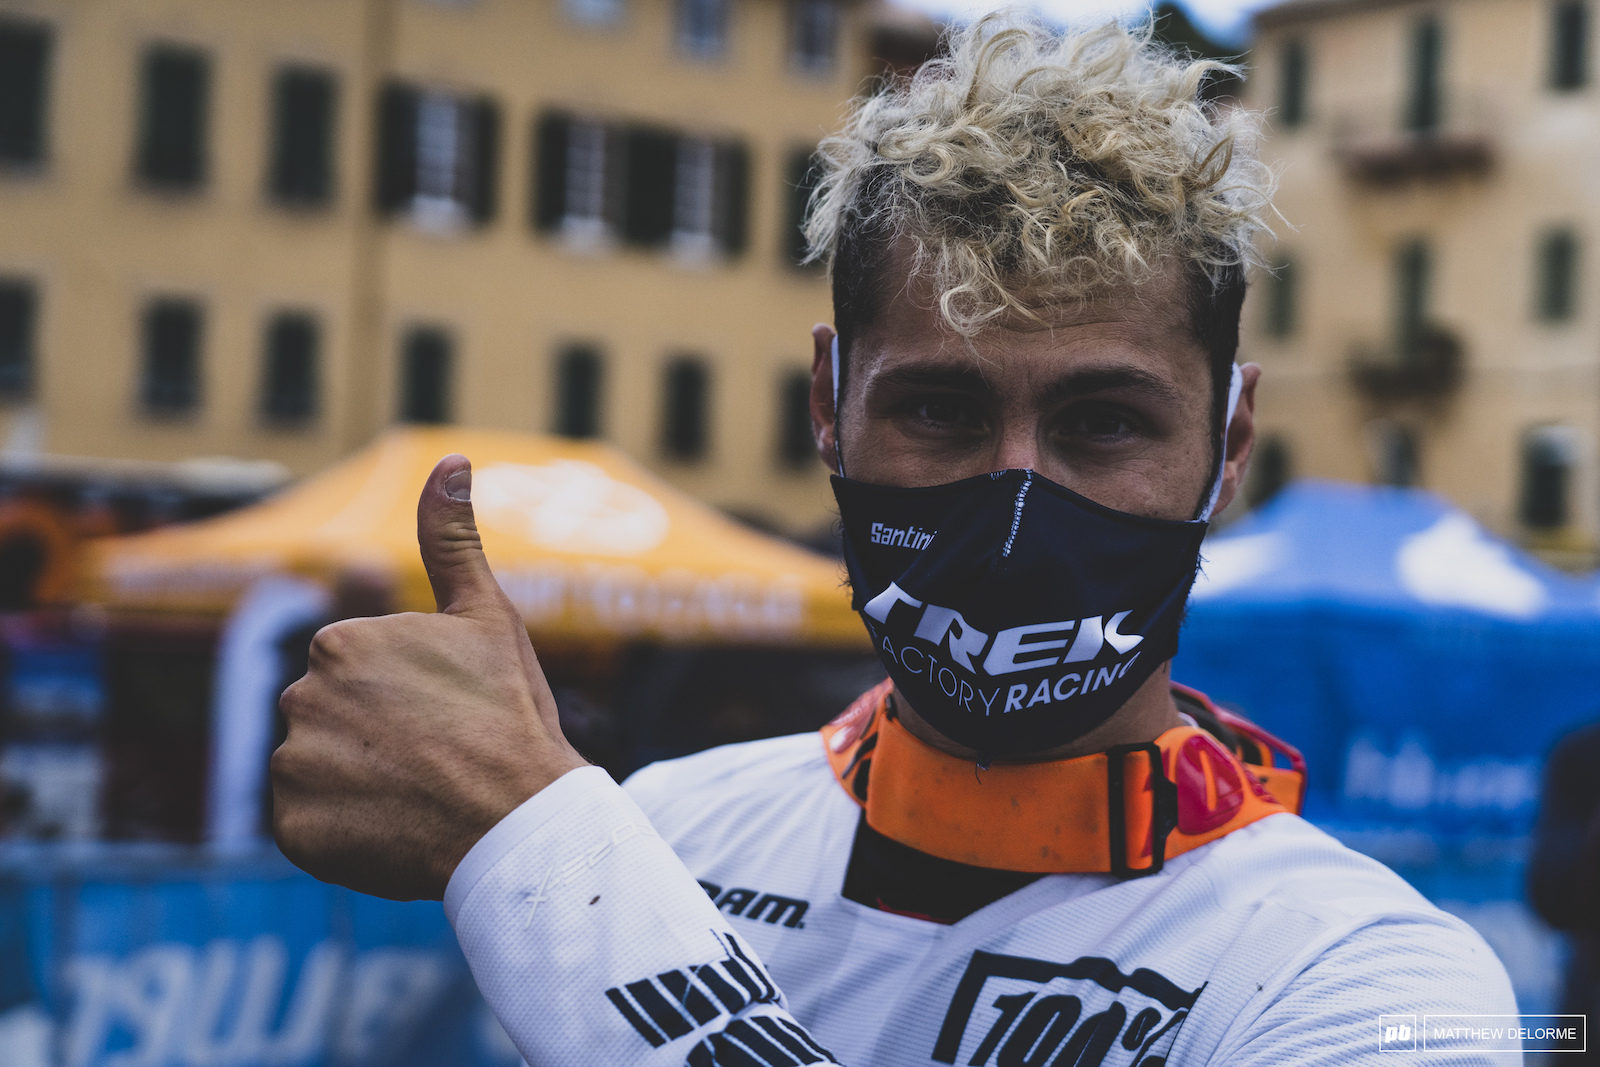 Florian Nicoali was happy to finish the season with a strong result after a rough start in Zermatt. Plenty of testing on the new new set up helped to get him there.